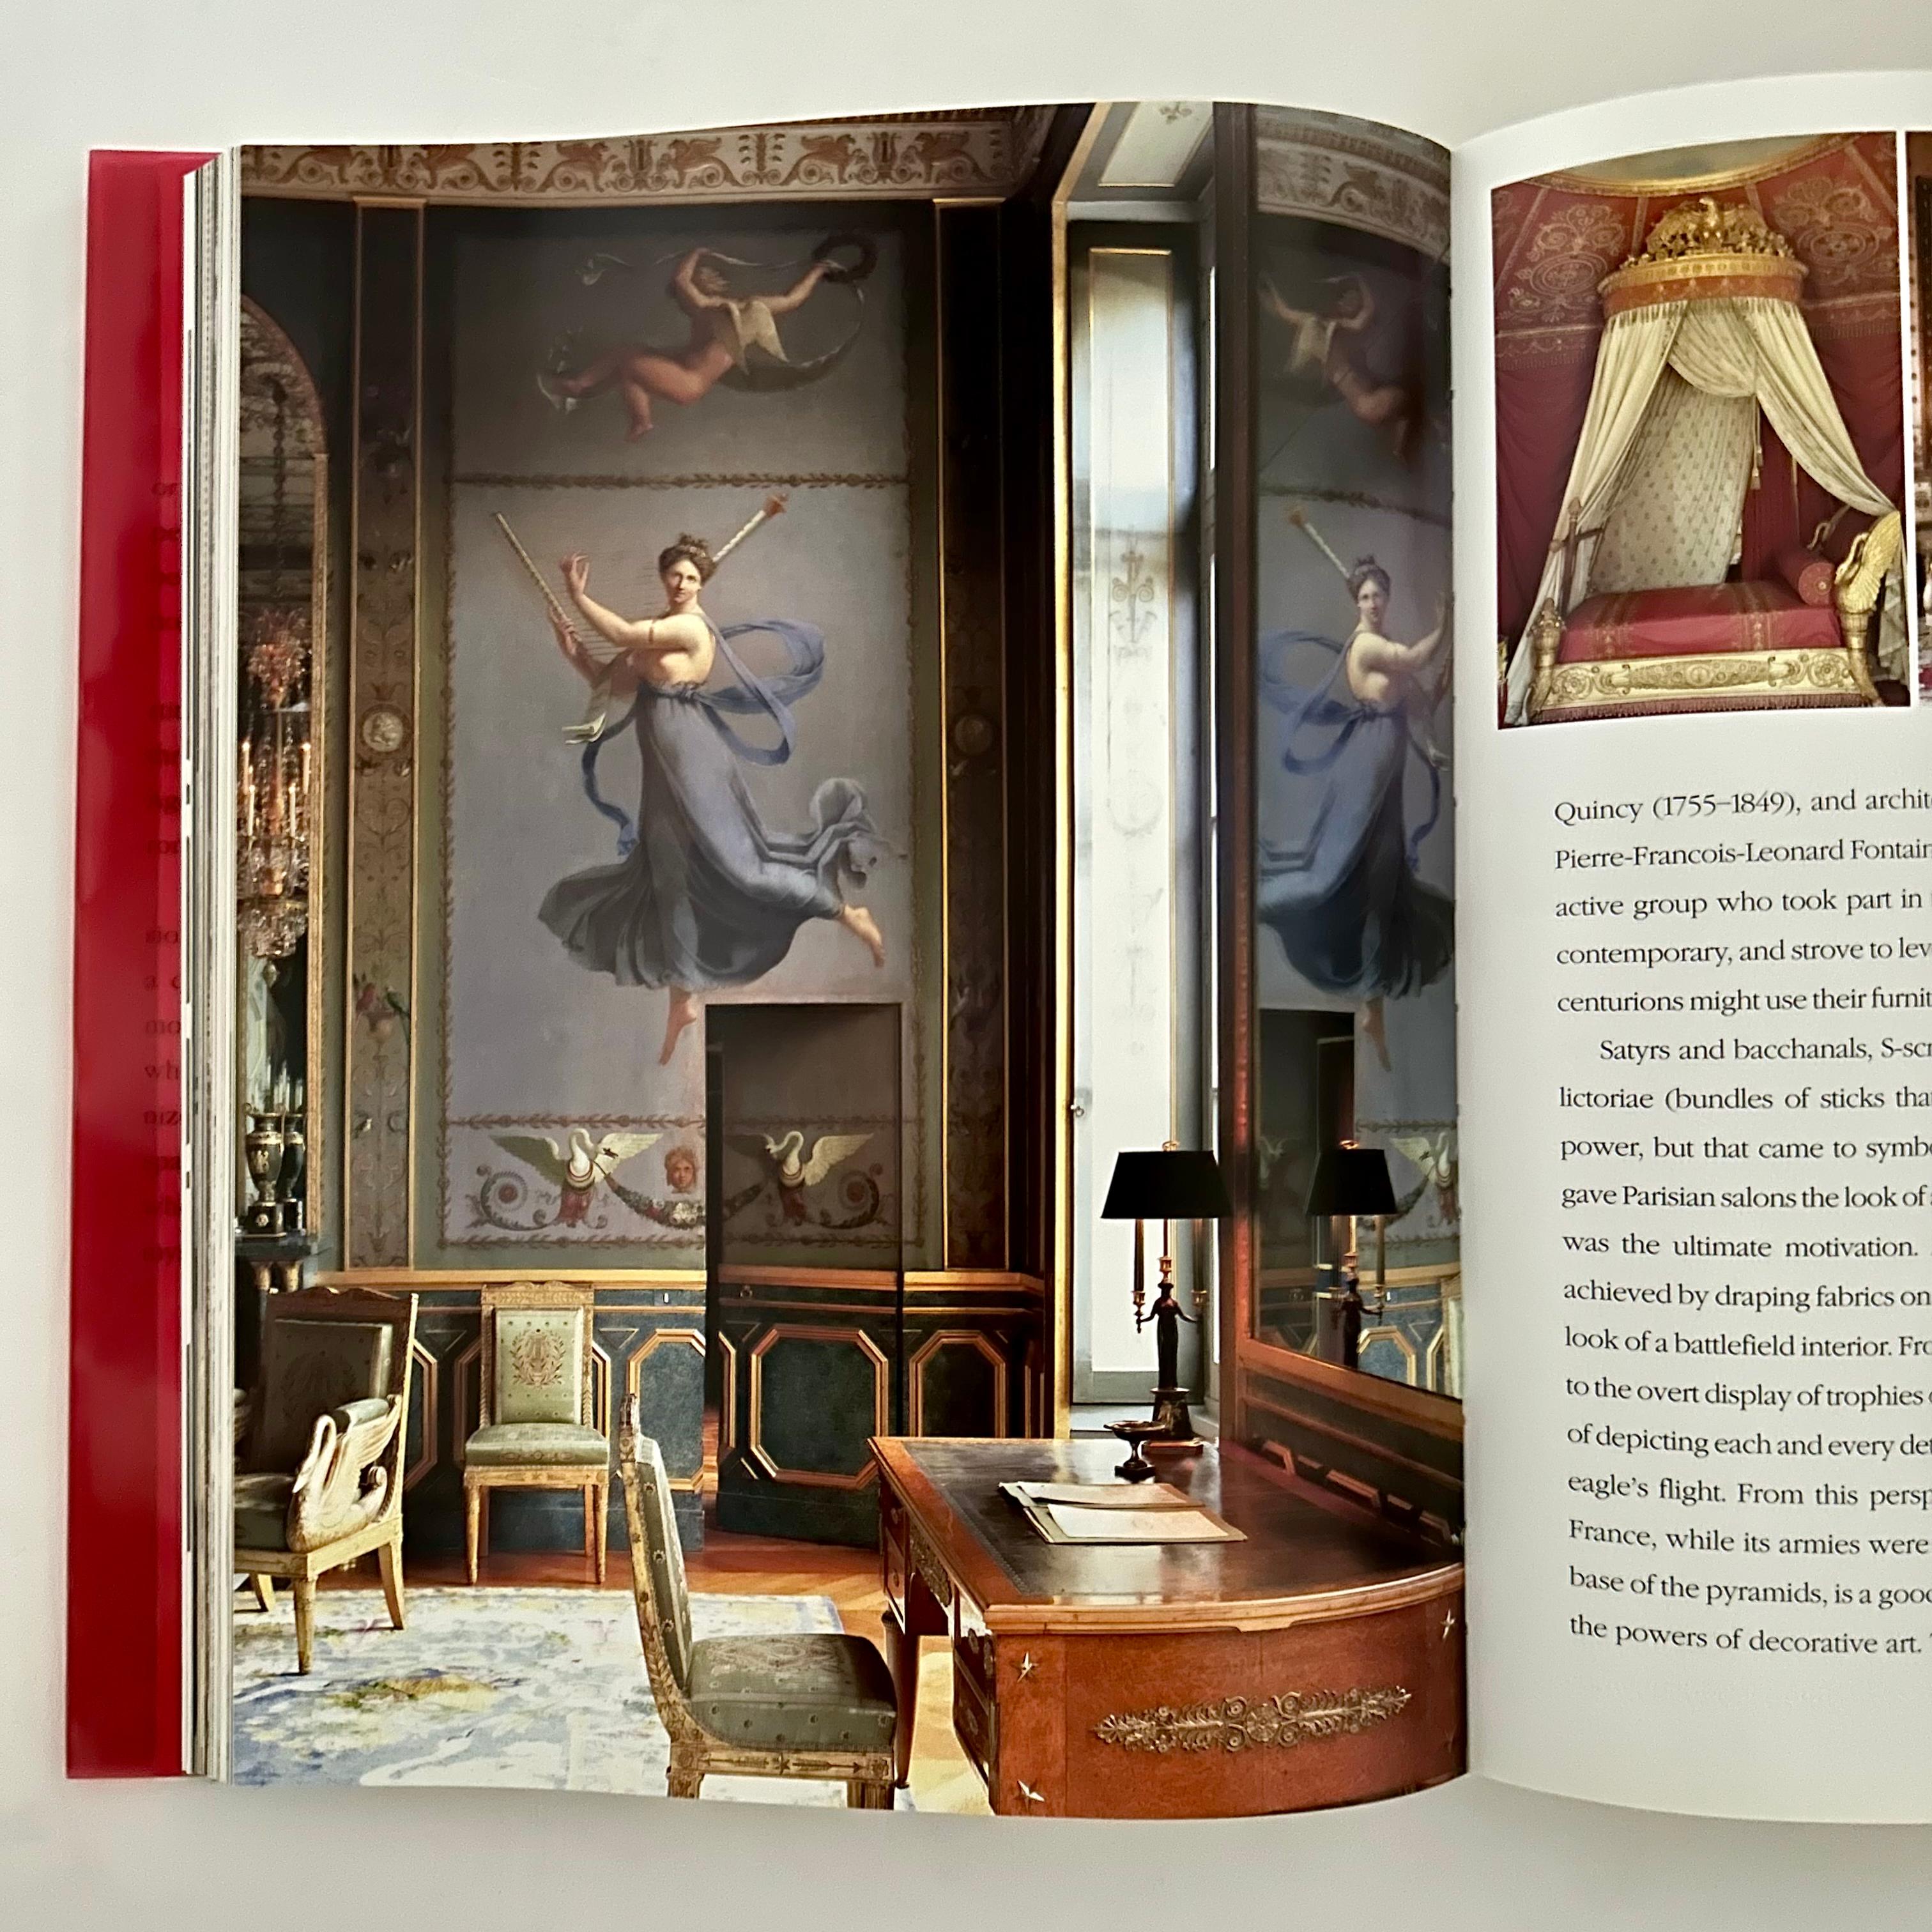 An Assouline publication, 1st edition, New York, 2005. Hardback with English text.

“ In the thirties, I wanted my living room to resemble a bathroom. Today my bathrooms resemble living rooms.” - Carlos de Beistegui.

A hefty volume encompassing the